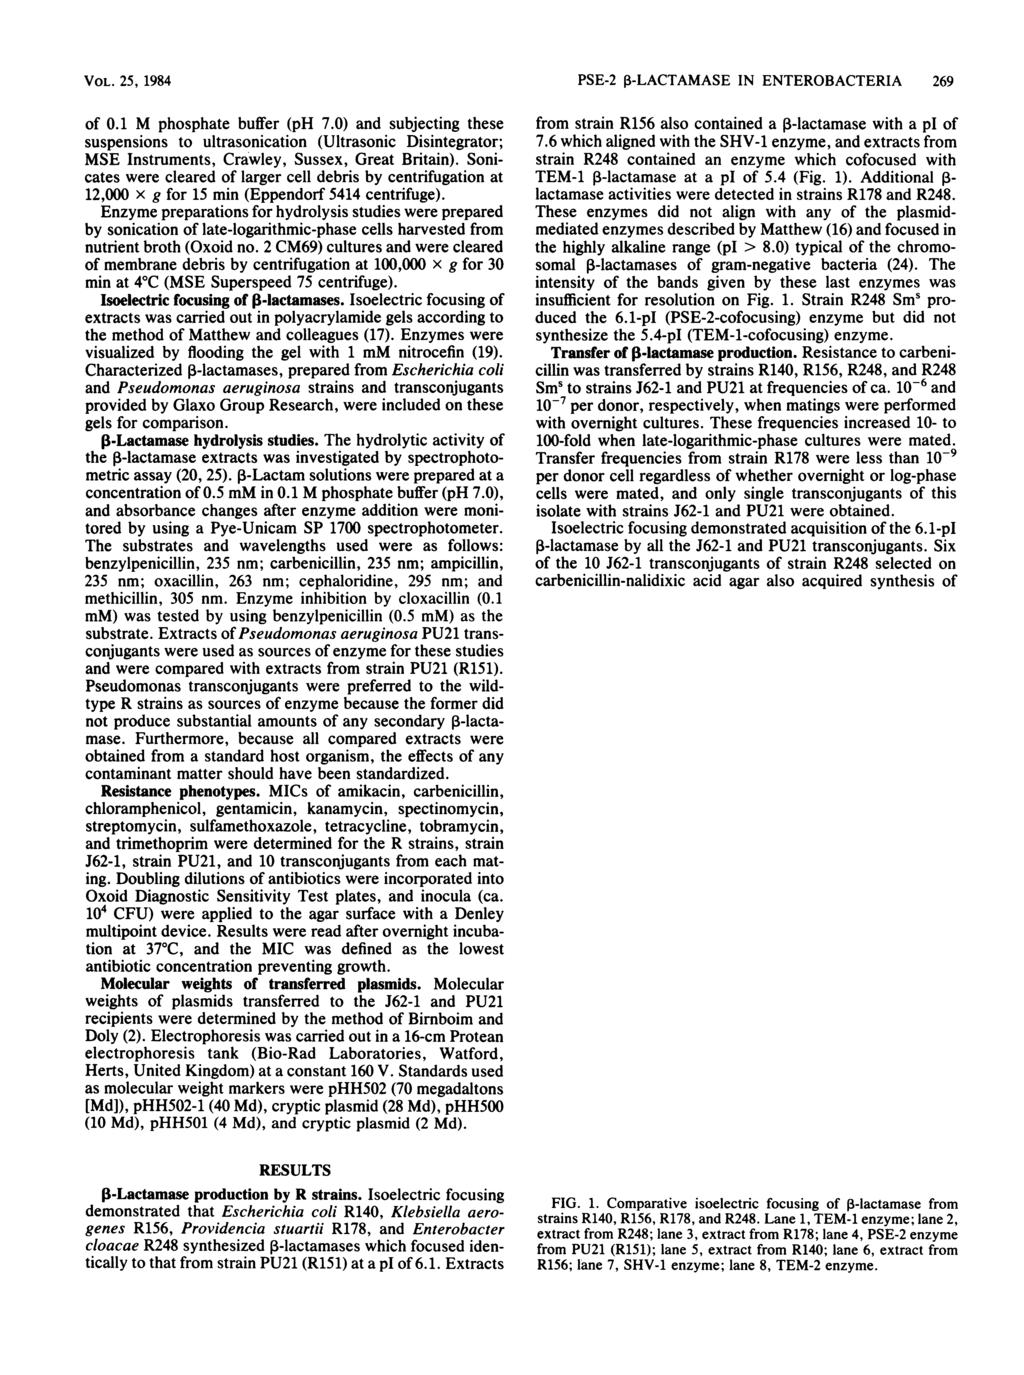 VOL. 25, 1984 of 0.1 M phosphate buffer (ph 7.0) and subjecting these suspensions to ultrasonication (Ultrasonic Disintegrator; MSE Instruments, Crawley, Sussex, Great Britain).